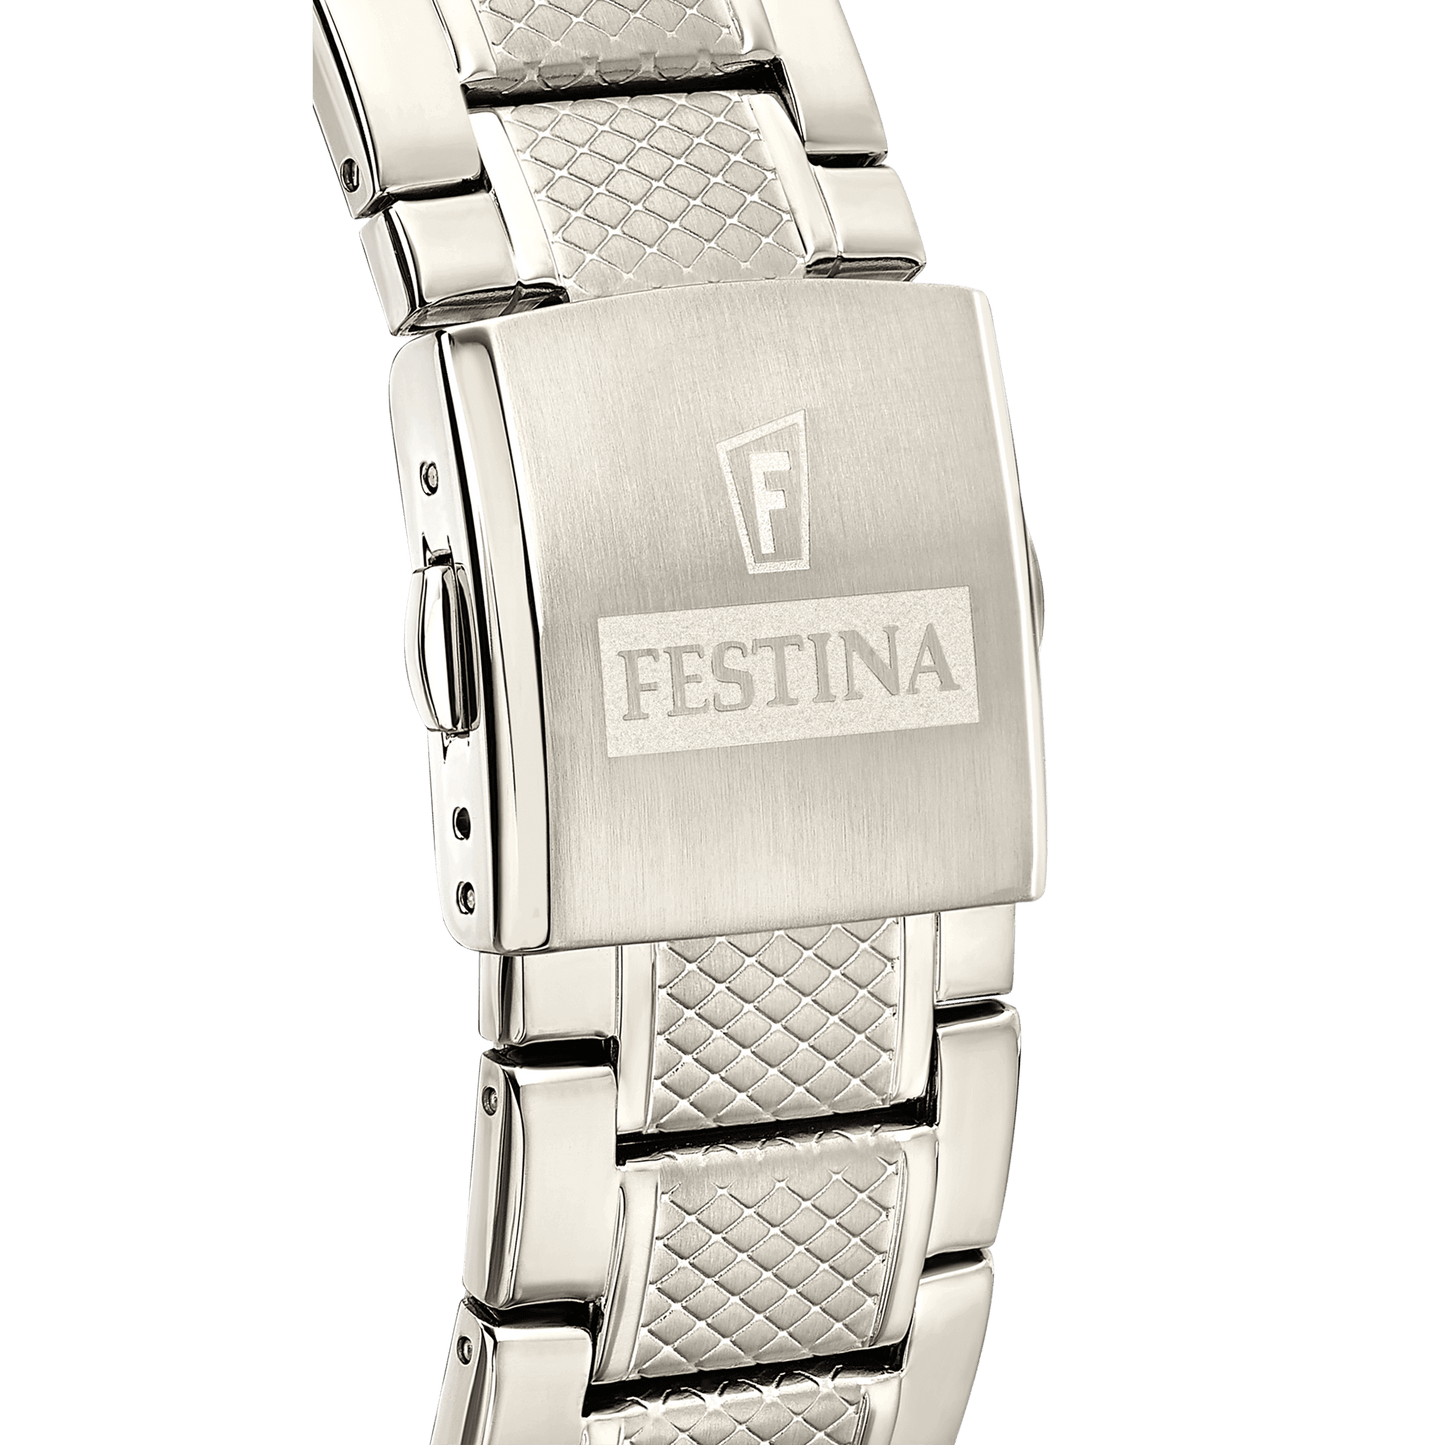 Chrono Sport F20439-1 | Water Resistance 100m/330ft - Strap Material Stainless Steel - Size 44 mm / Free shipping, 2 years warranty & 30 Days Return | Festina Watches USA